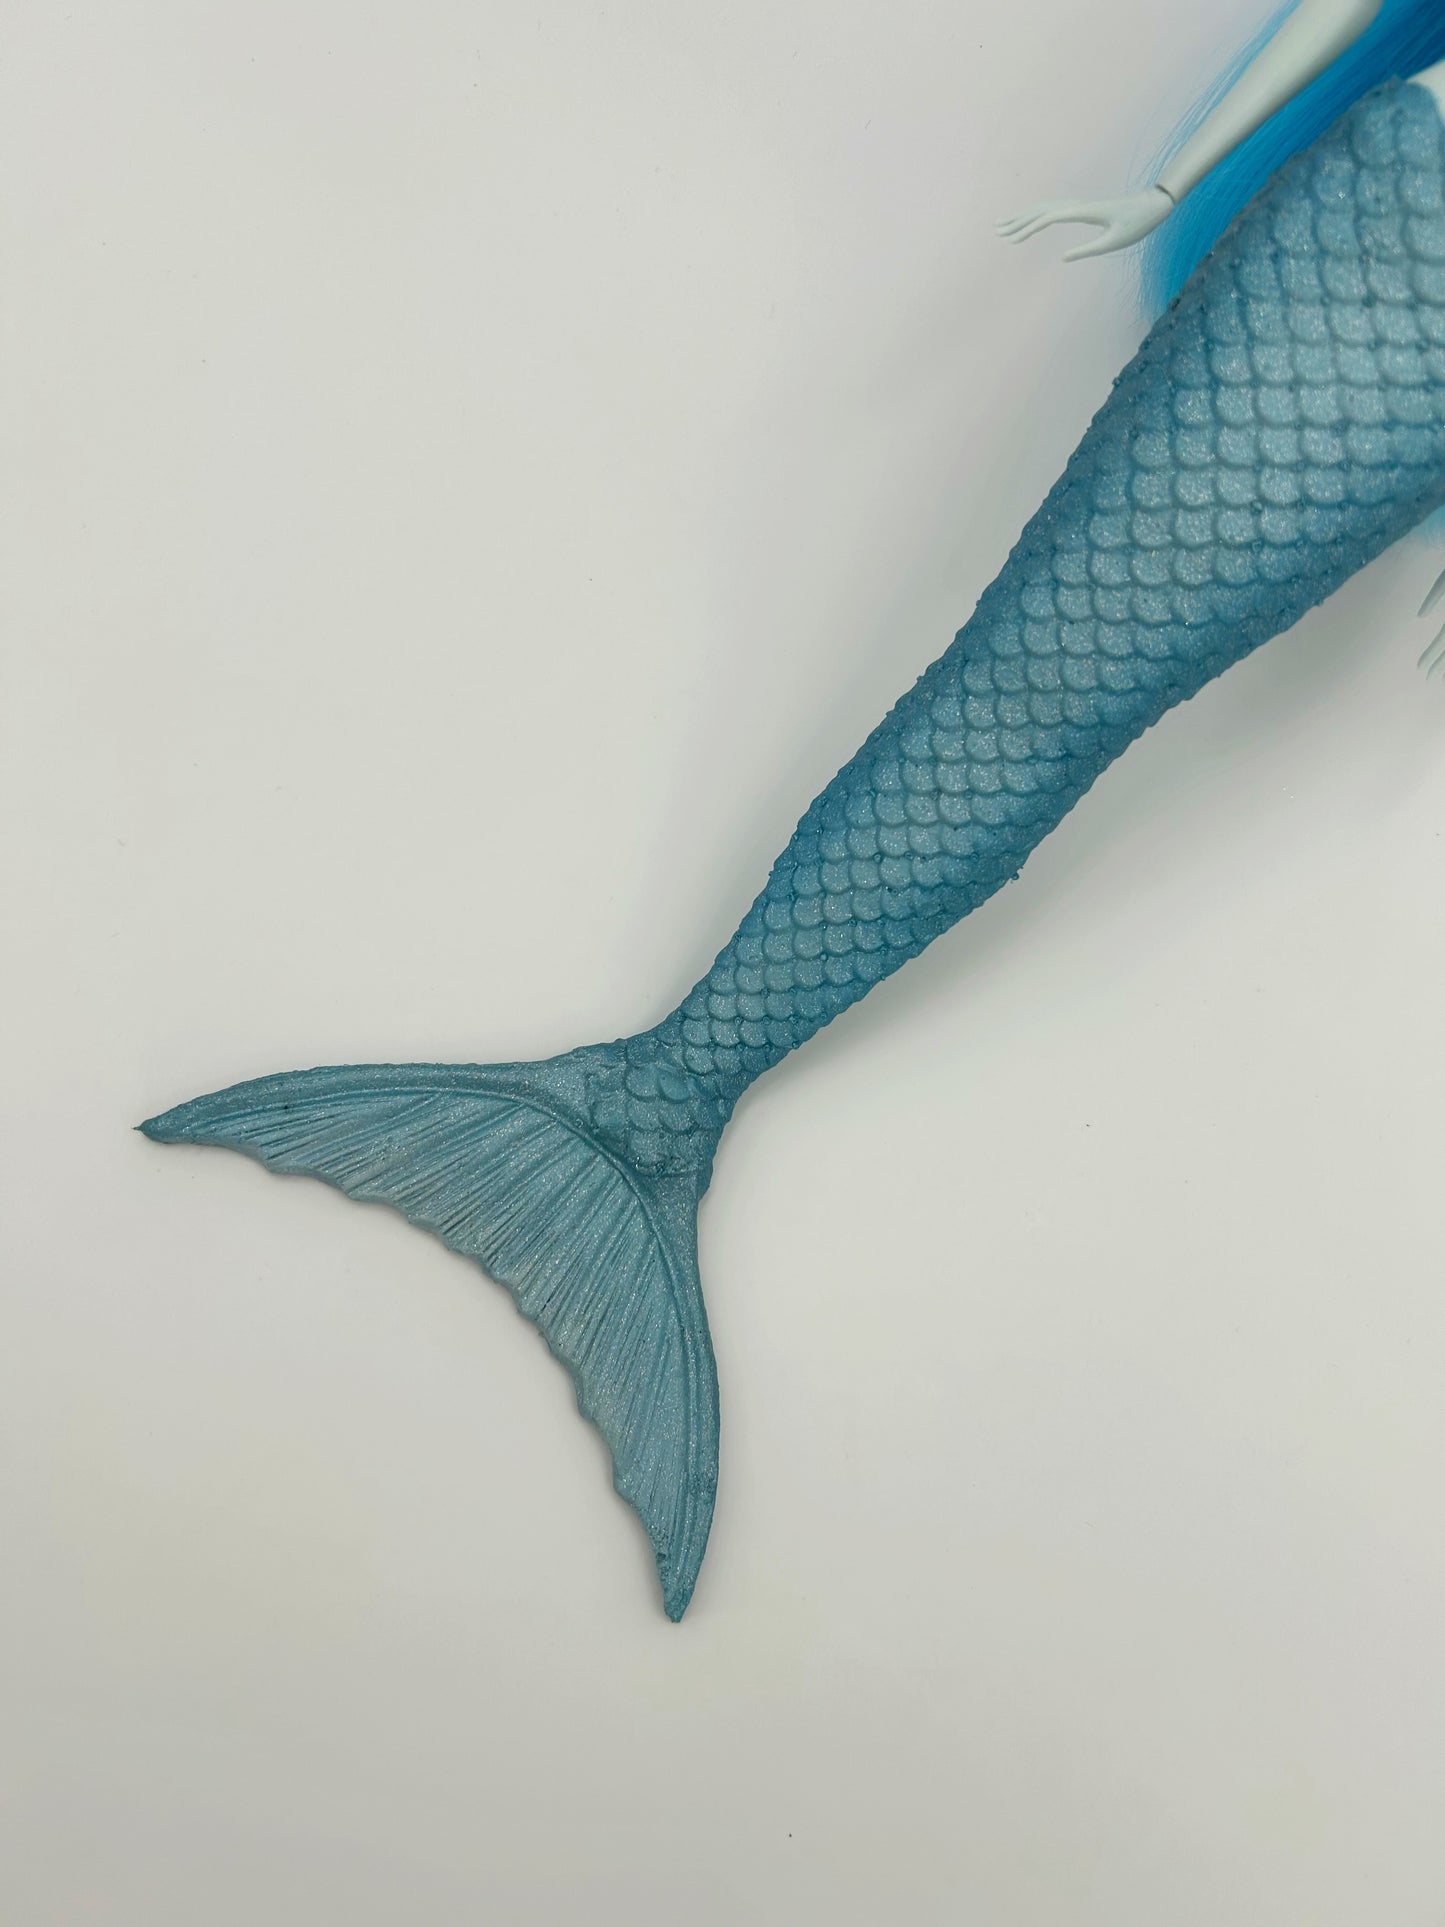 Aquamarine silicone mermaid tail and bra for doll (doll not included)